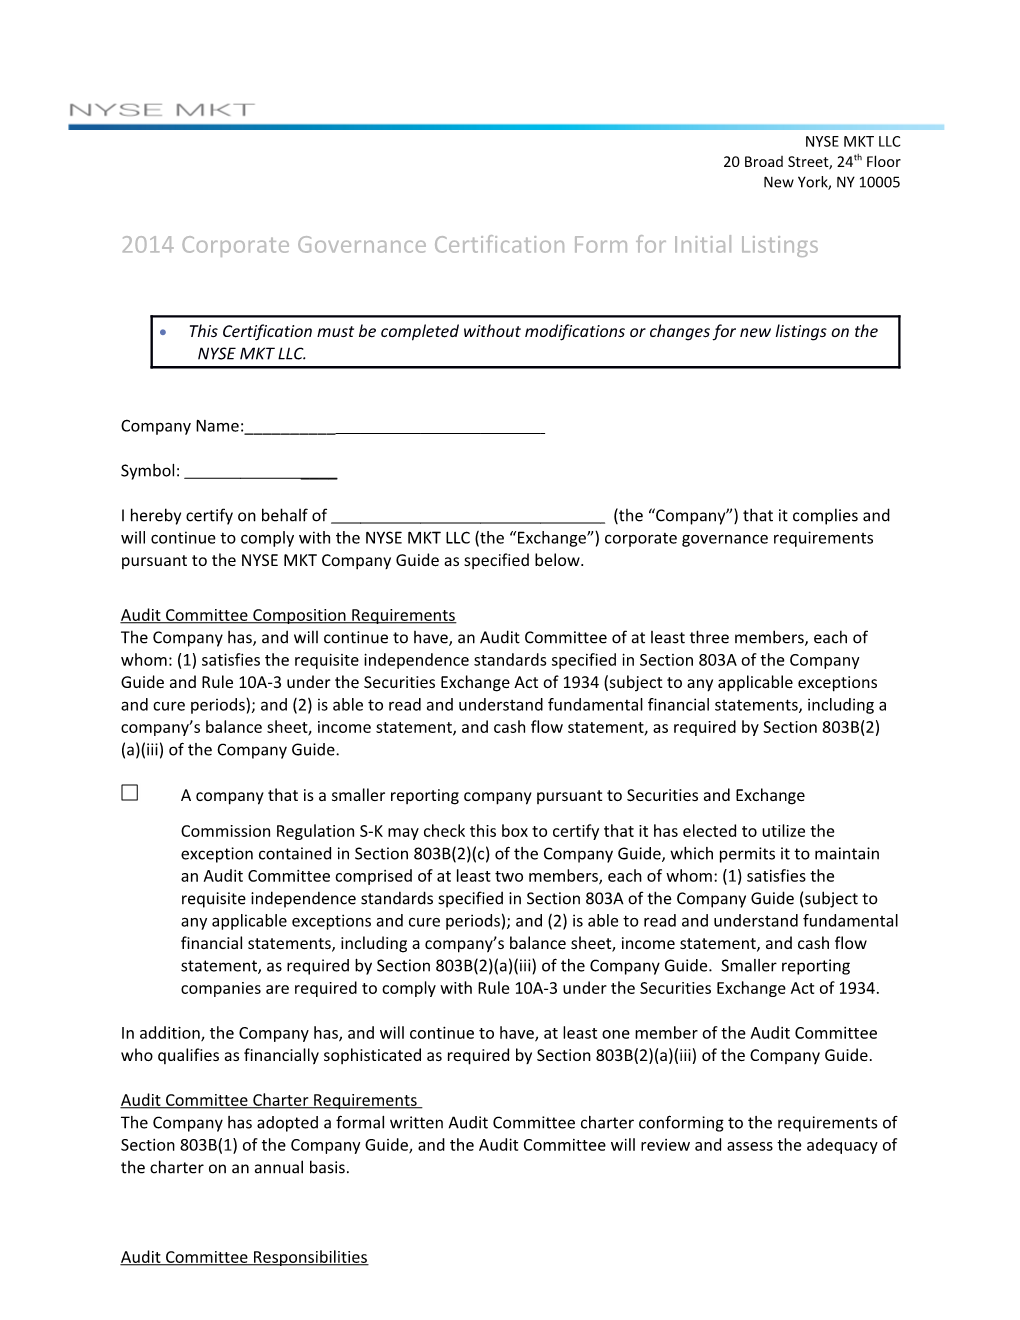 NYSE MKT LLC 2014 Corporate Governance Certification Form for Initial Listings